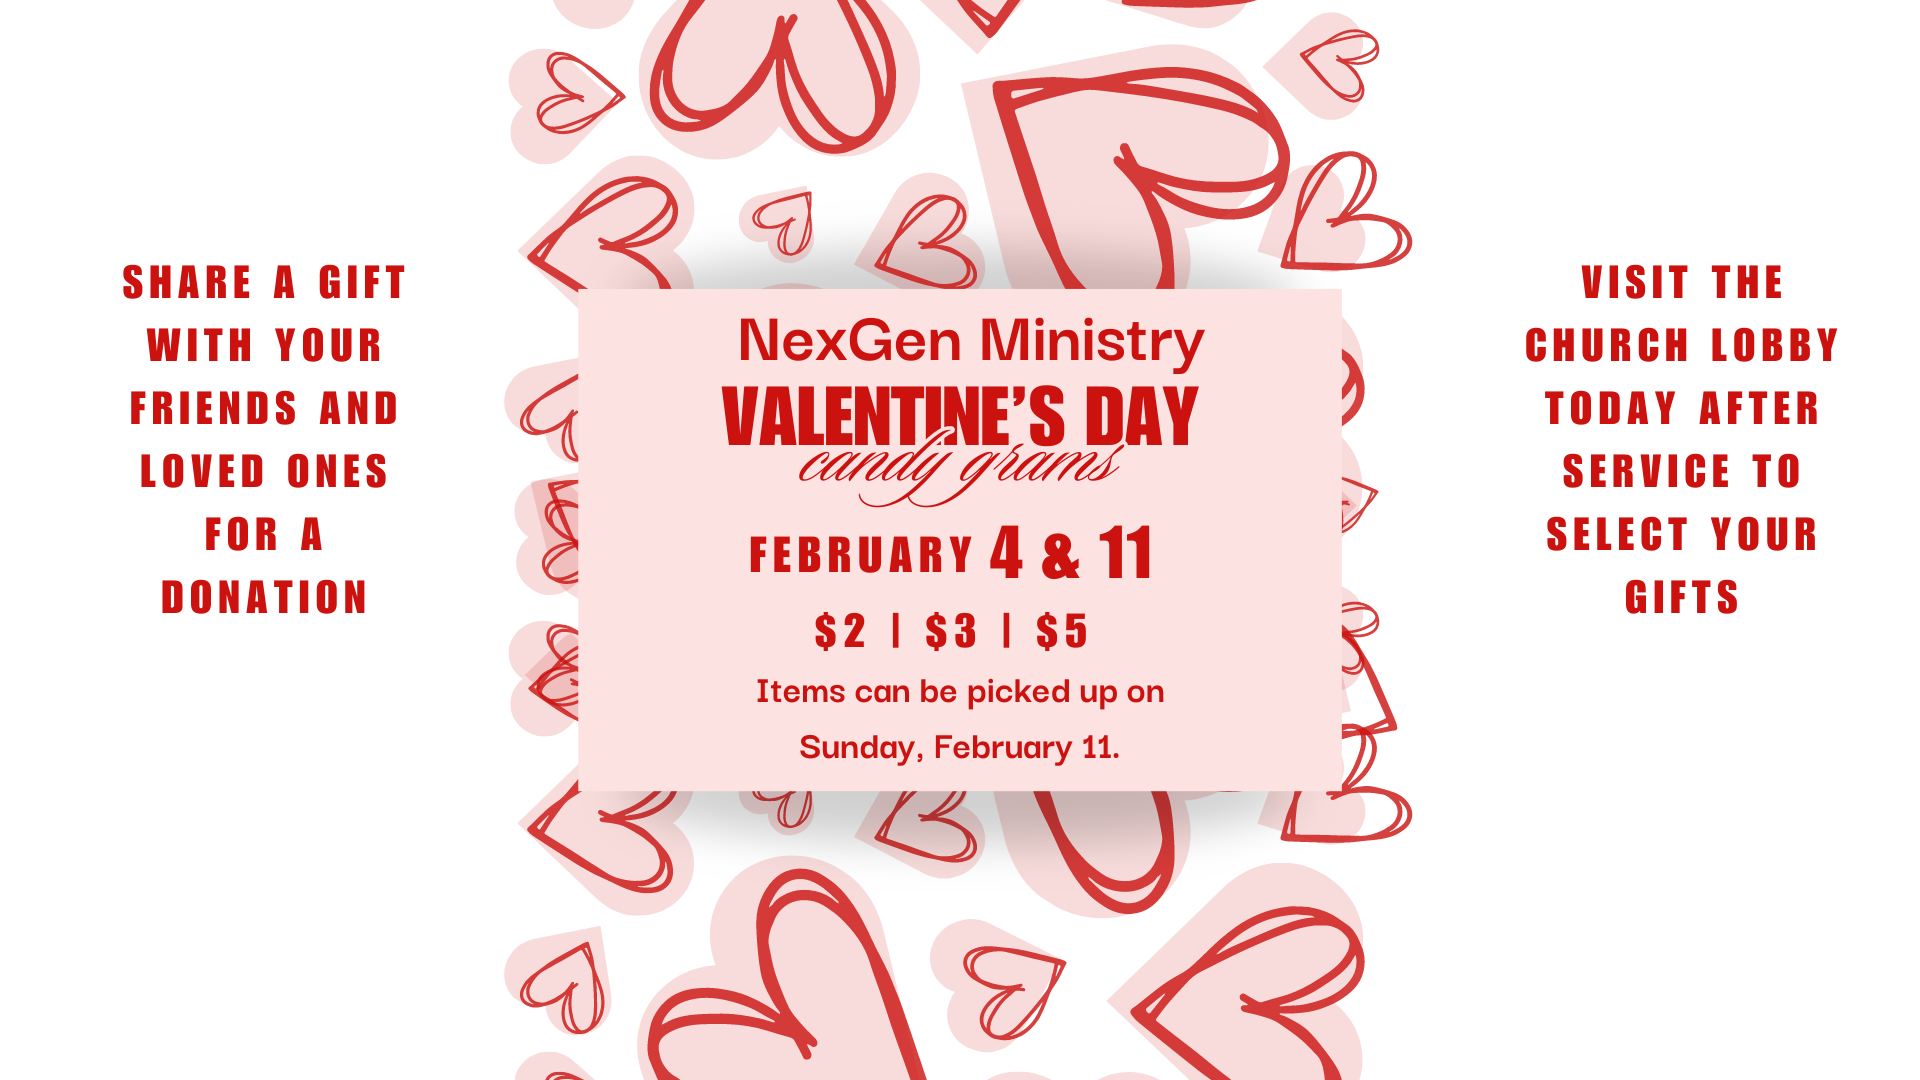 Valentine's Day Candy Grams